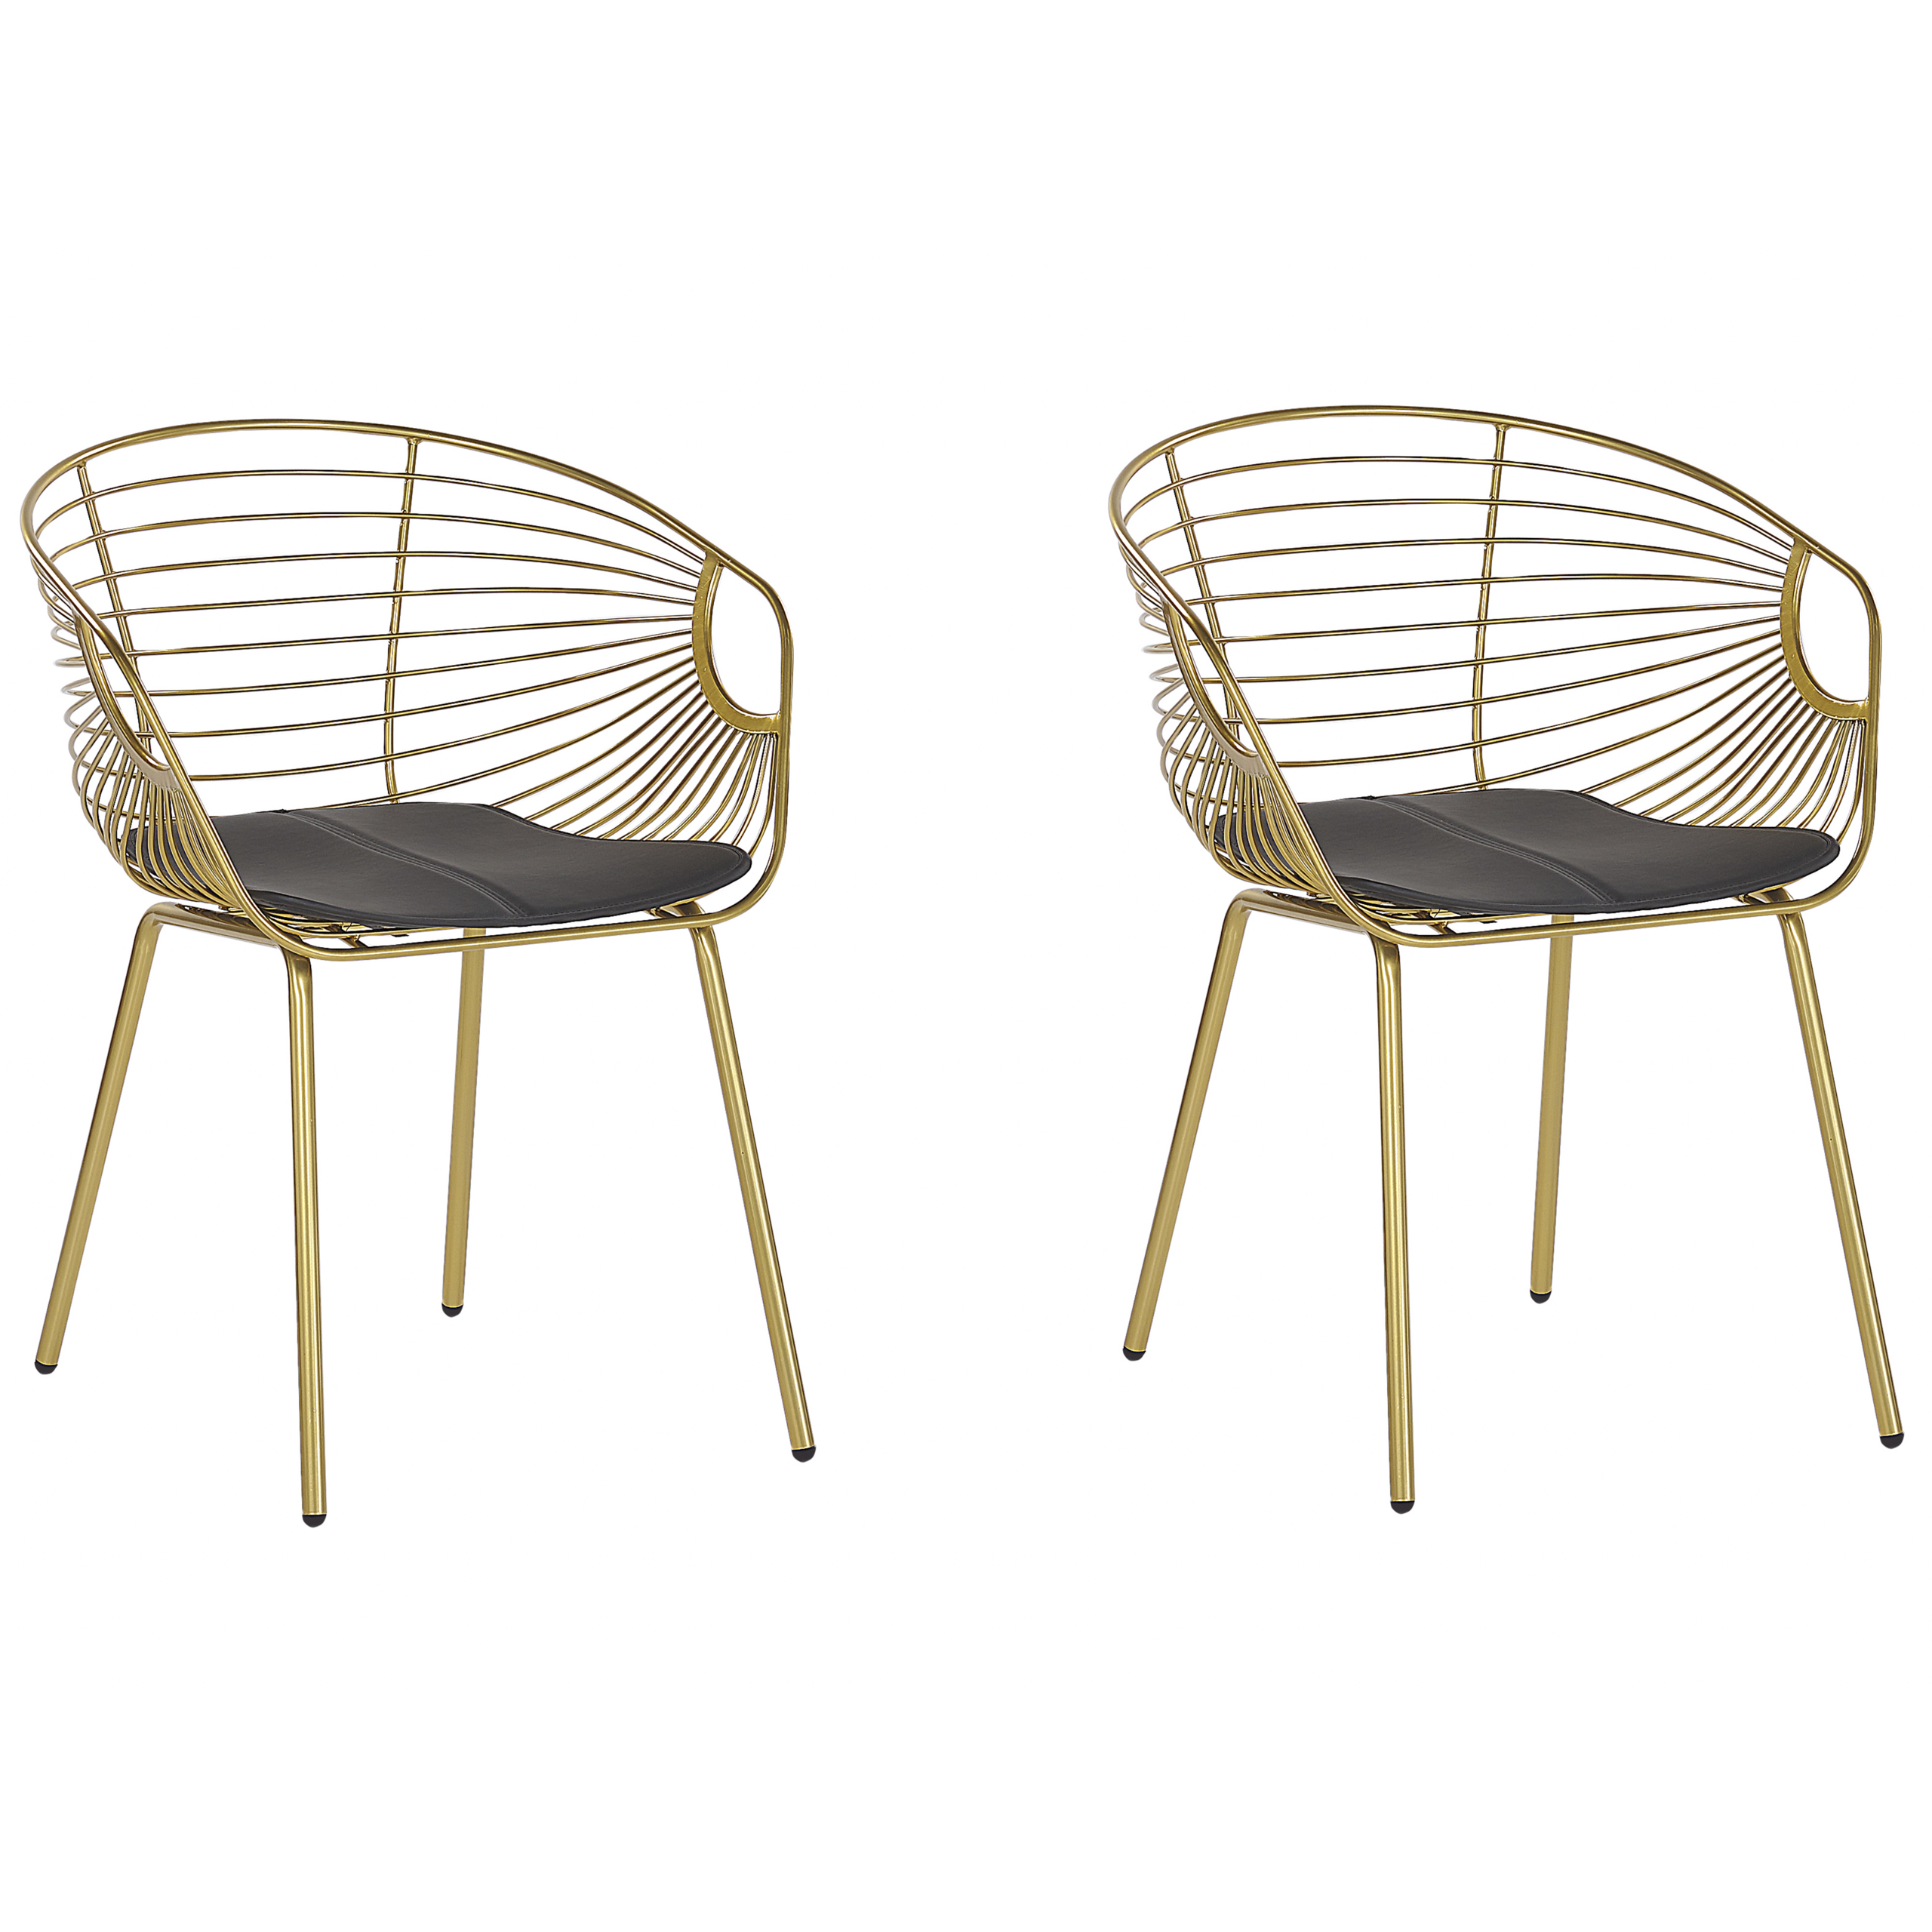 Beliani Set of 2 Dining Chairs Gold Metal Wire Design Faux Leather Black Seat Pad Glam Industrial Modern